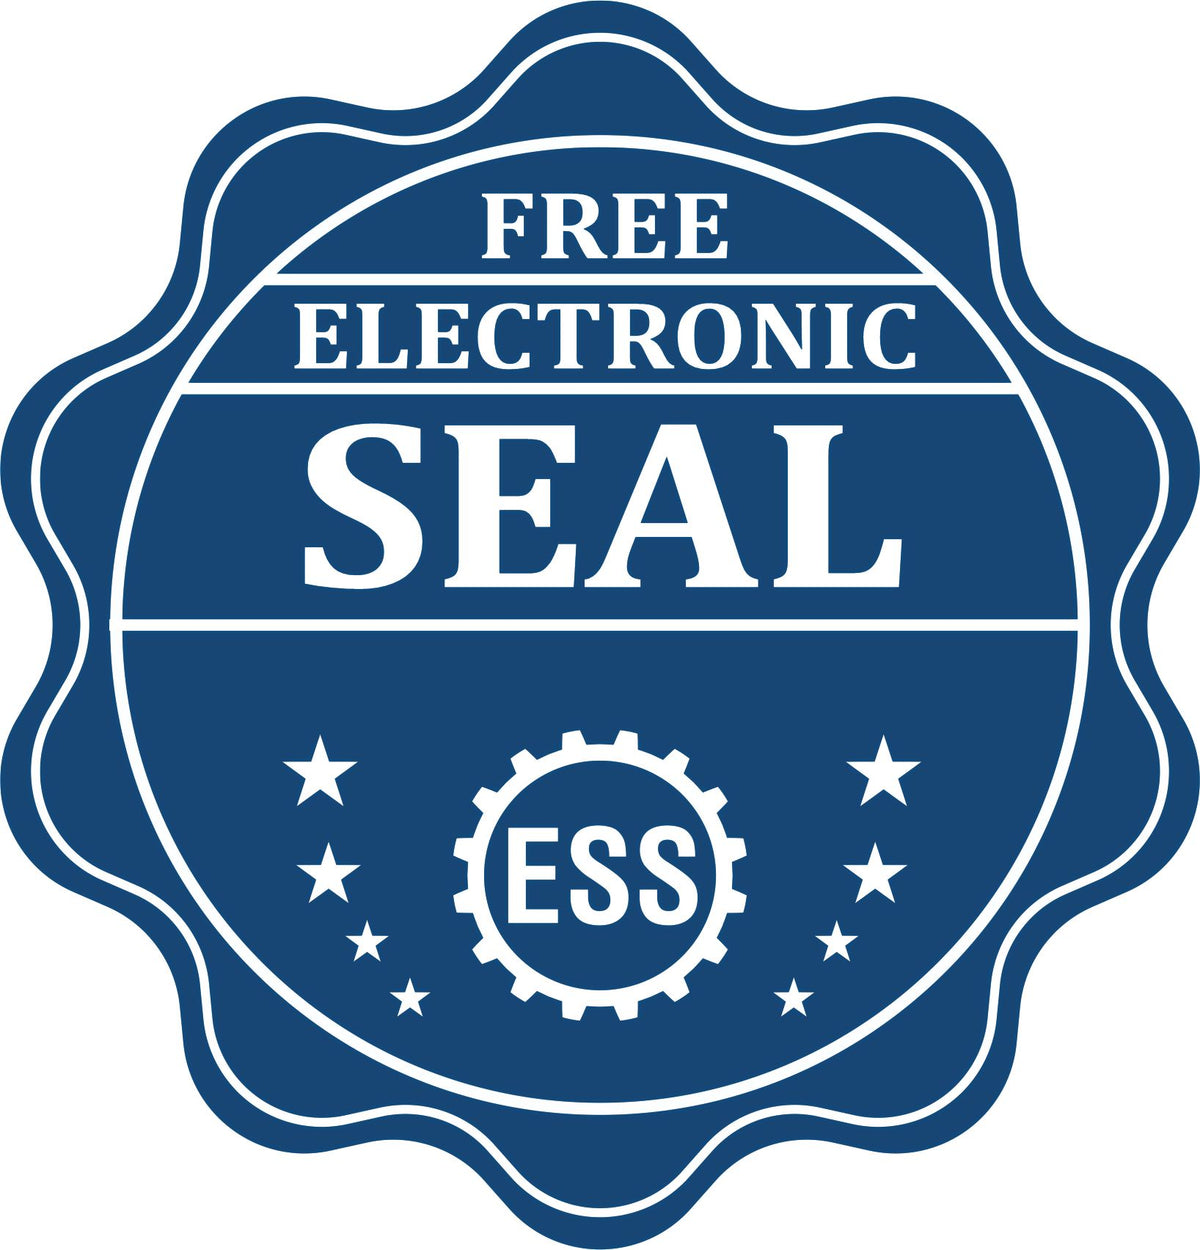 A badge showing a free electronic seal for the Extended Long Reach Hawaii Surveyor Embosser with stars and the ESS gear on the emblem.